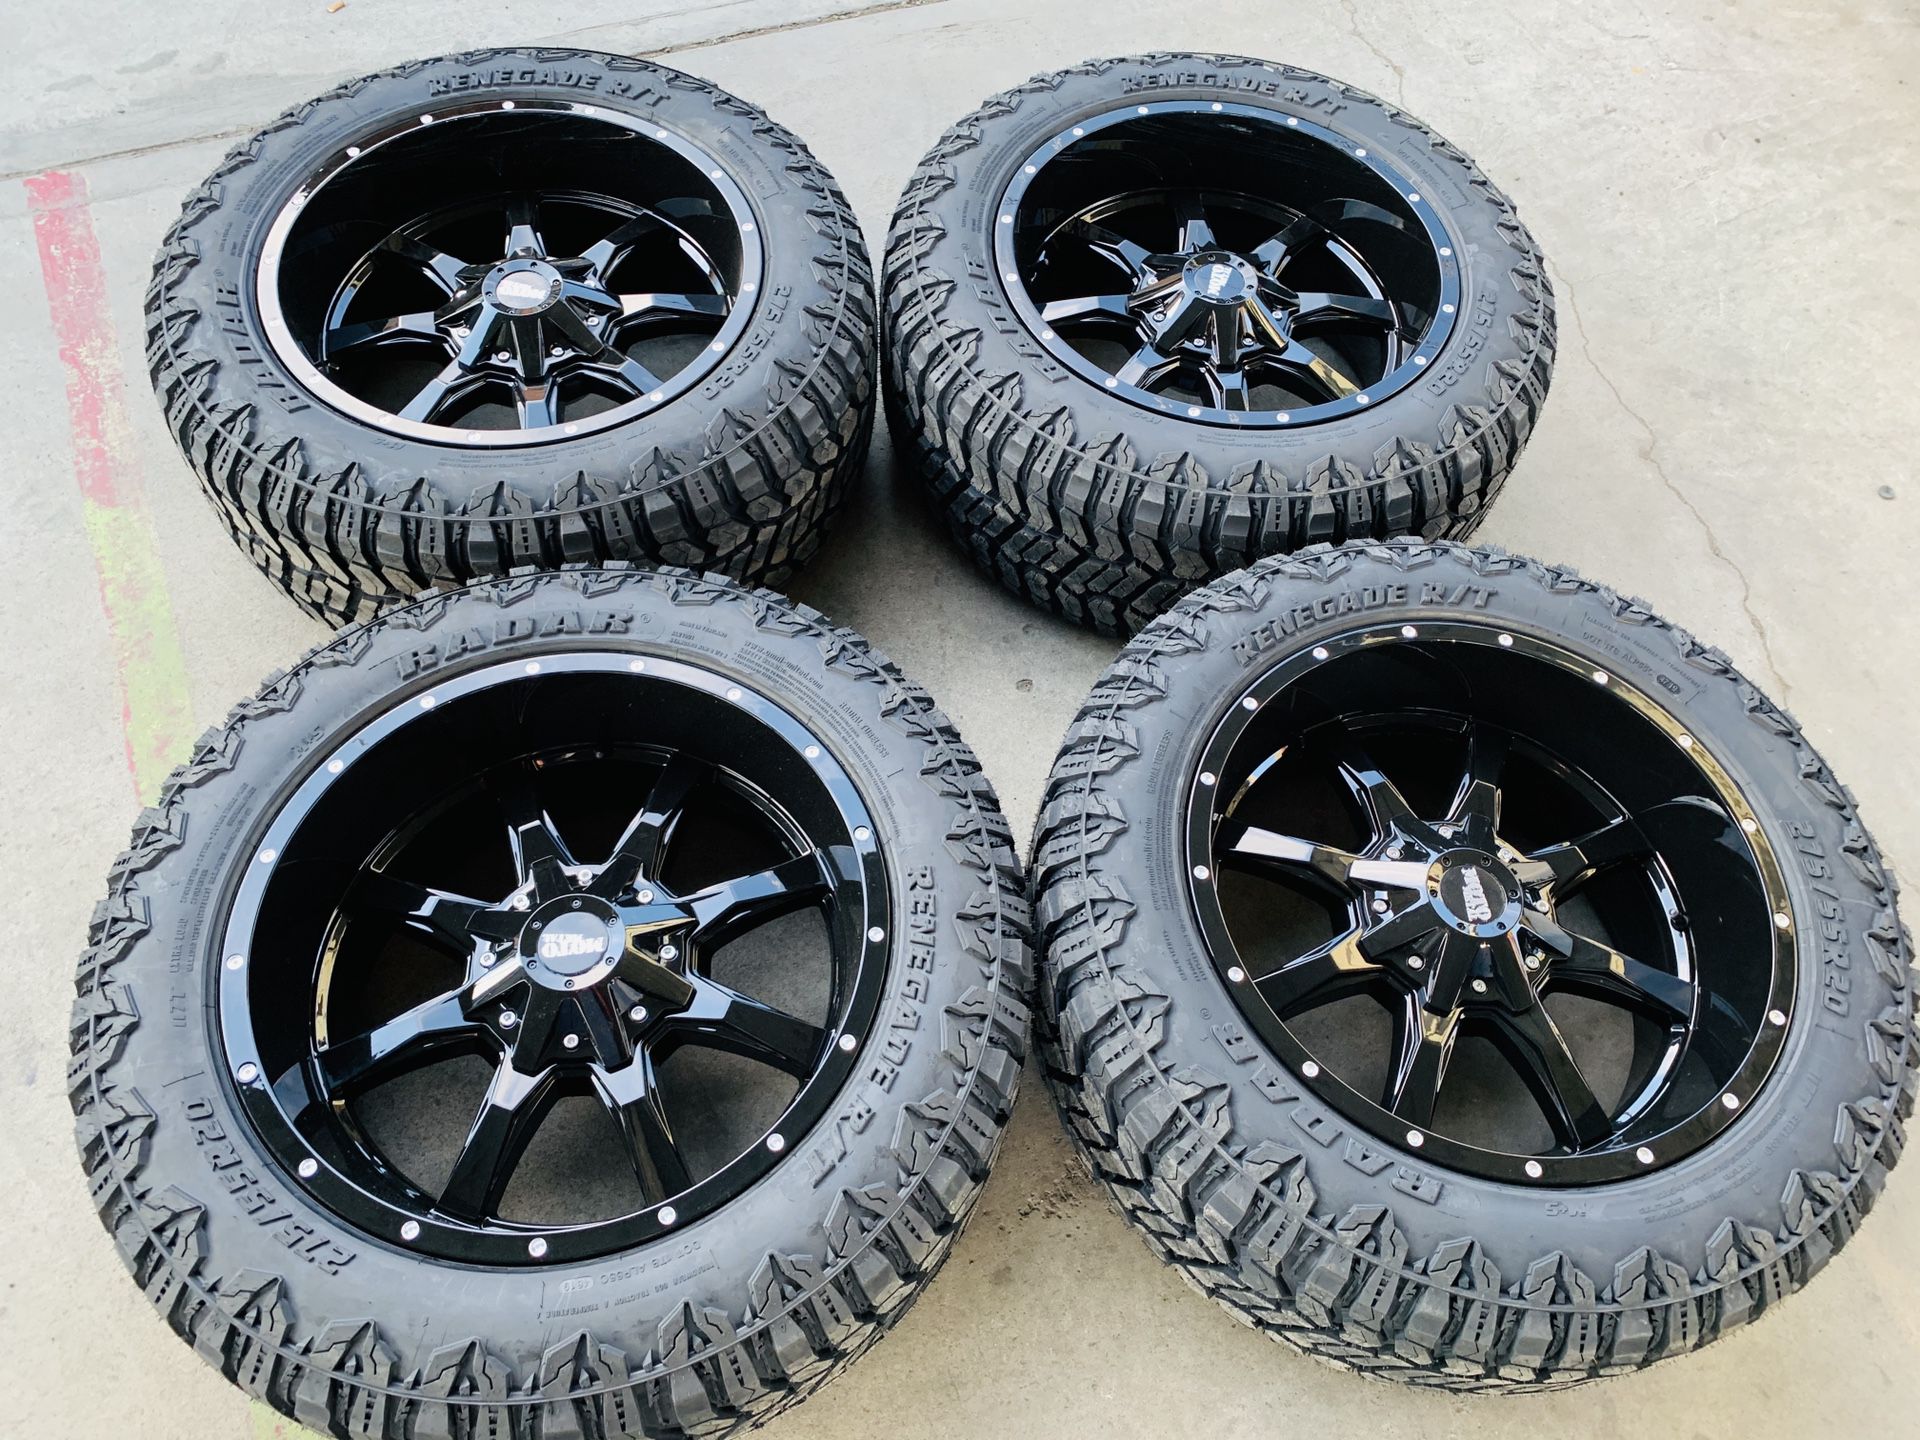 20x10 Brand new rims and tires 2755520 6 lug Chevy gmc Toyota ford Nissan